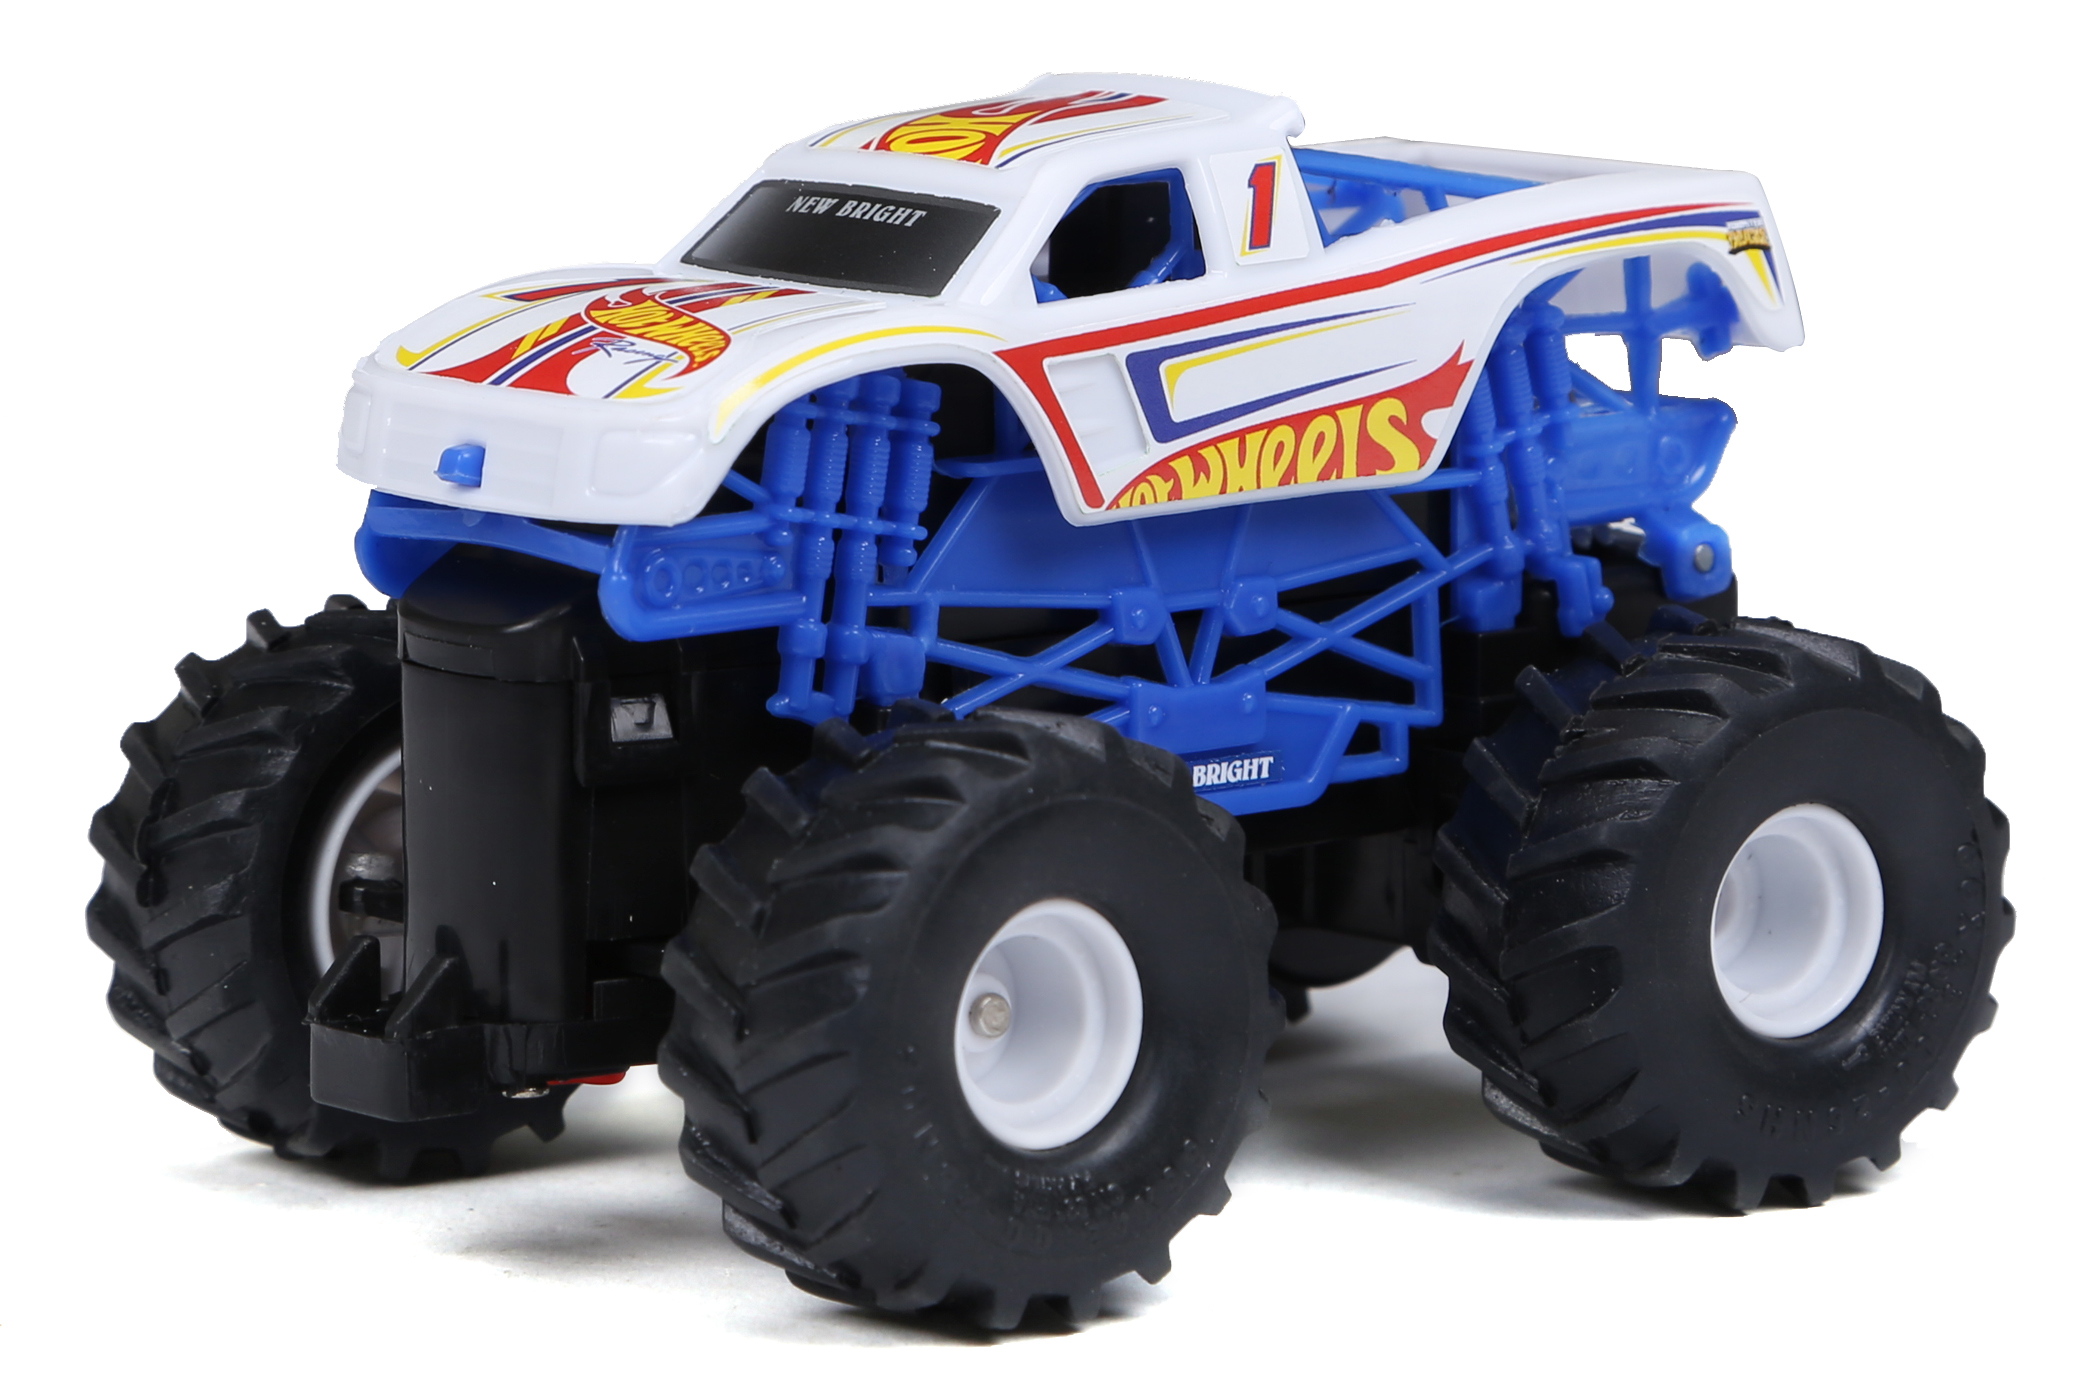 R/C Monster Truck Hot Wheels Racing #1 - White - New Bright Industrial Co.